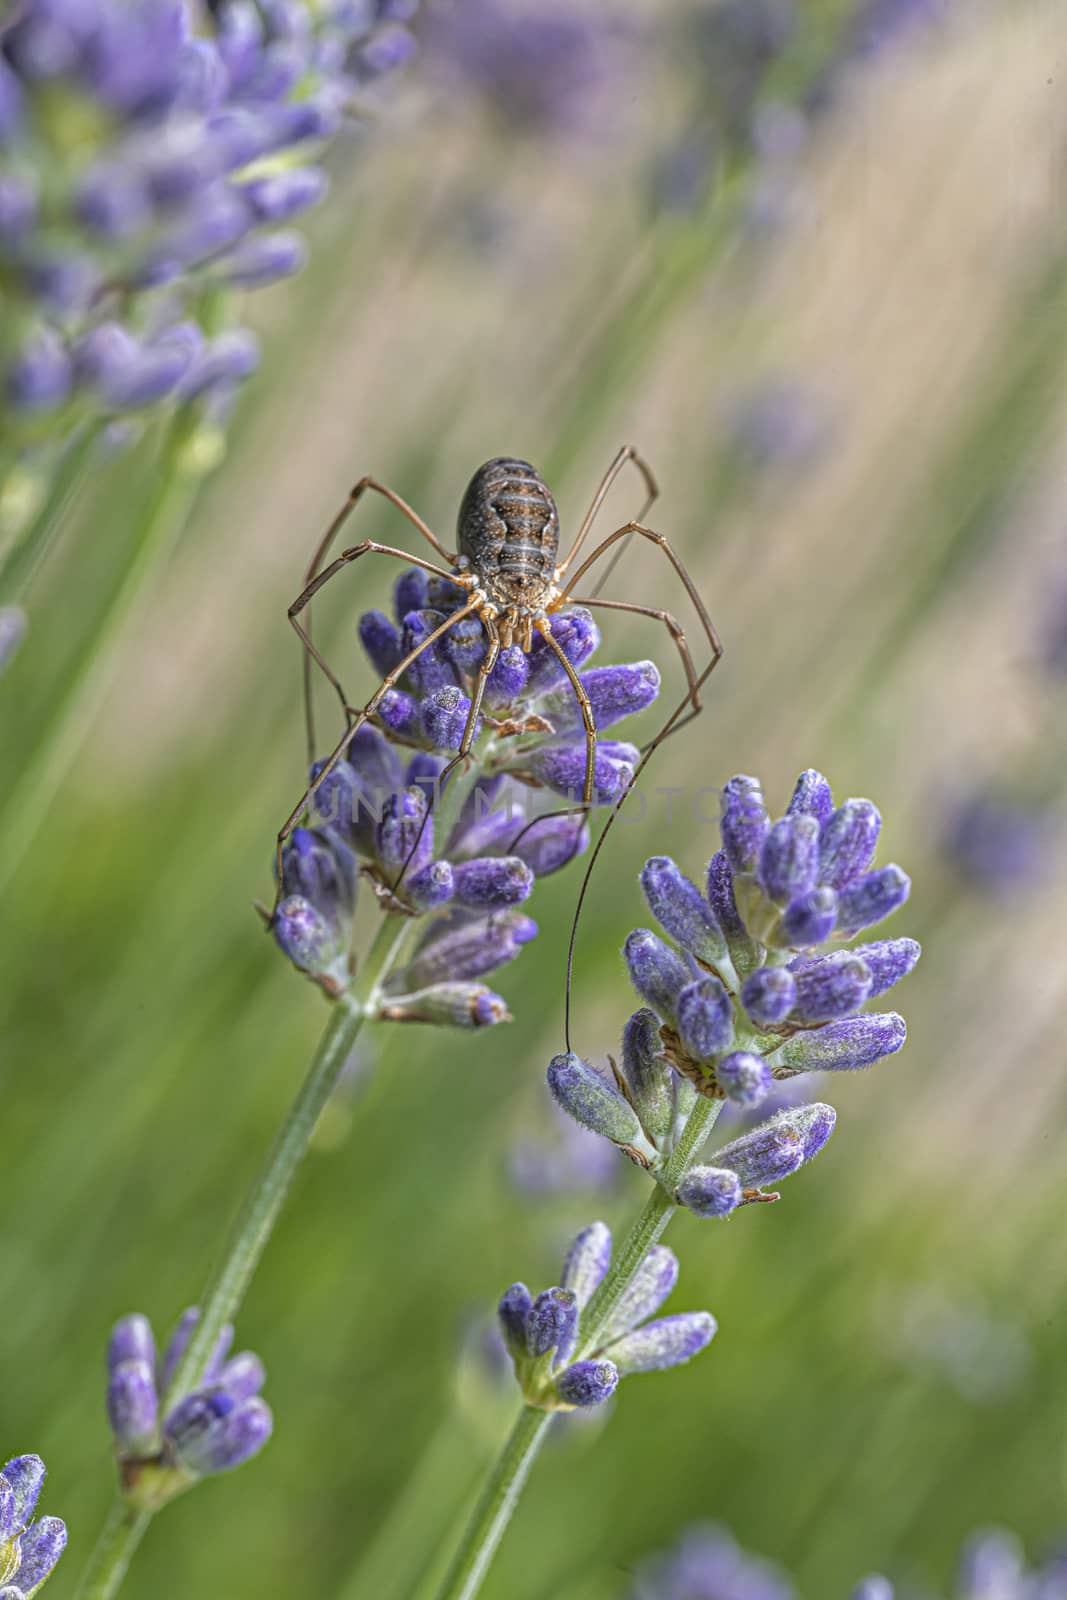 Huge spider laying on a purple lavender flower blossom waiting for insect to pass by to capture by ankorlight